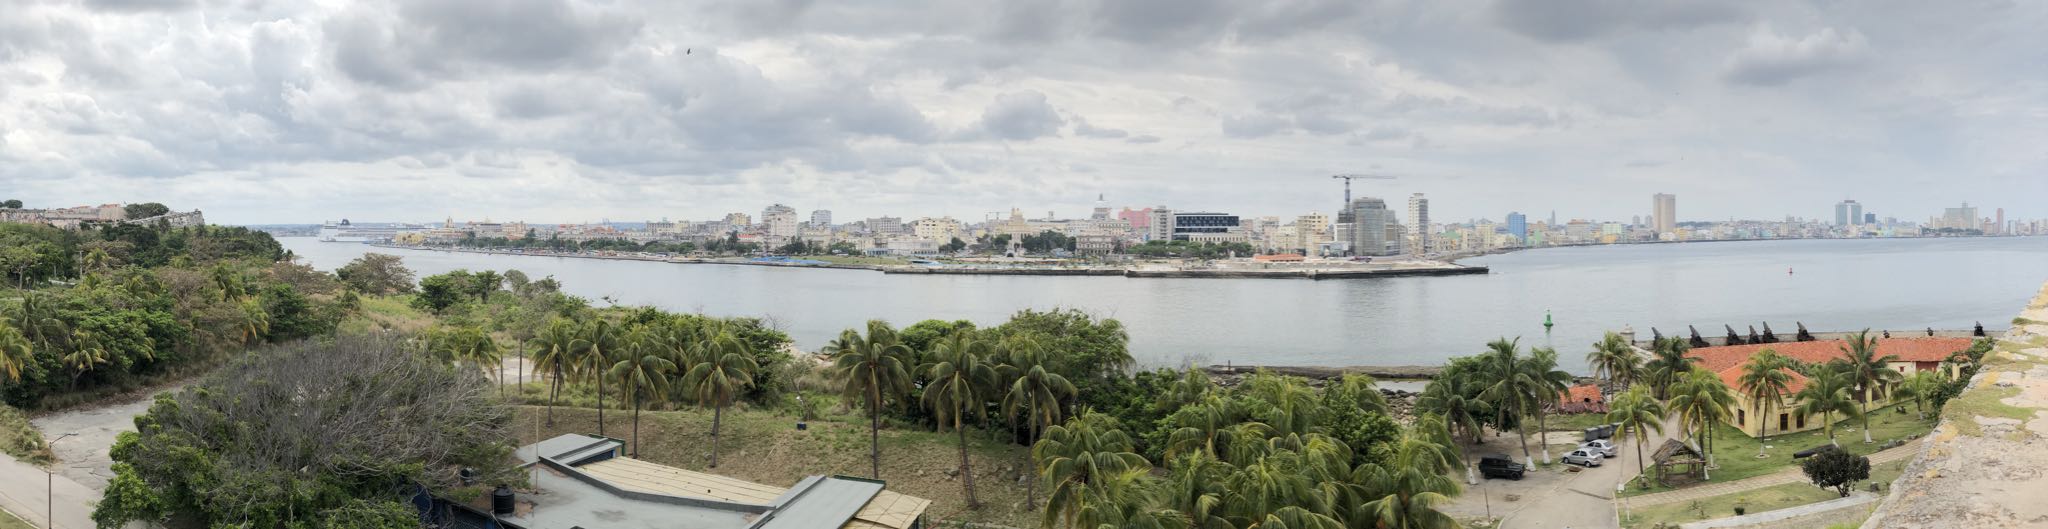 Photo 43 of 221 from the album Highlights Cuba 2019.